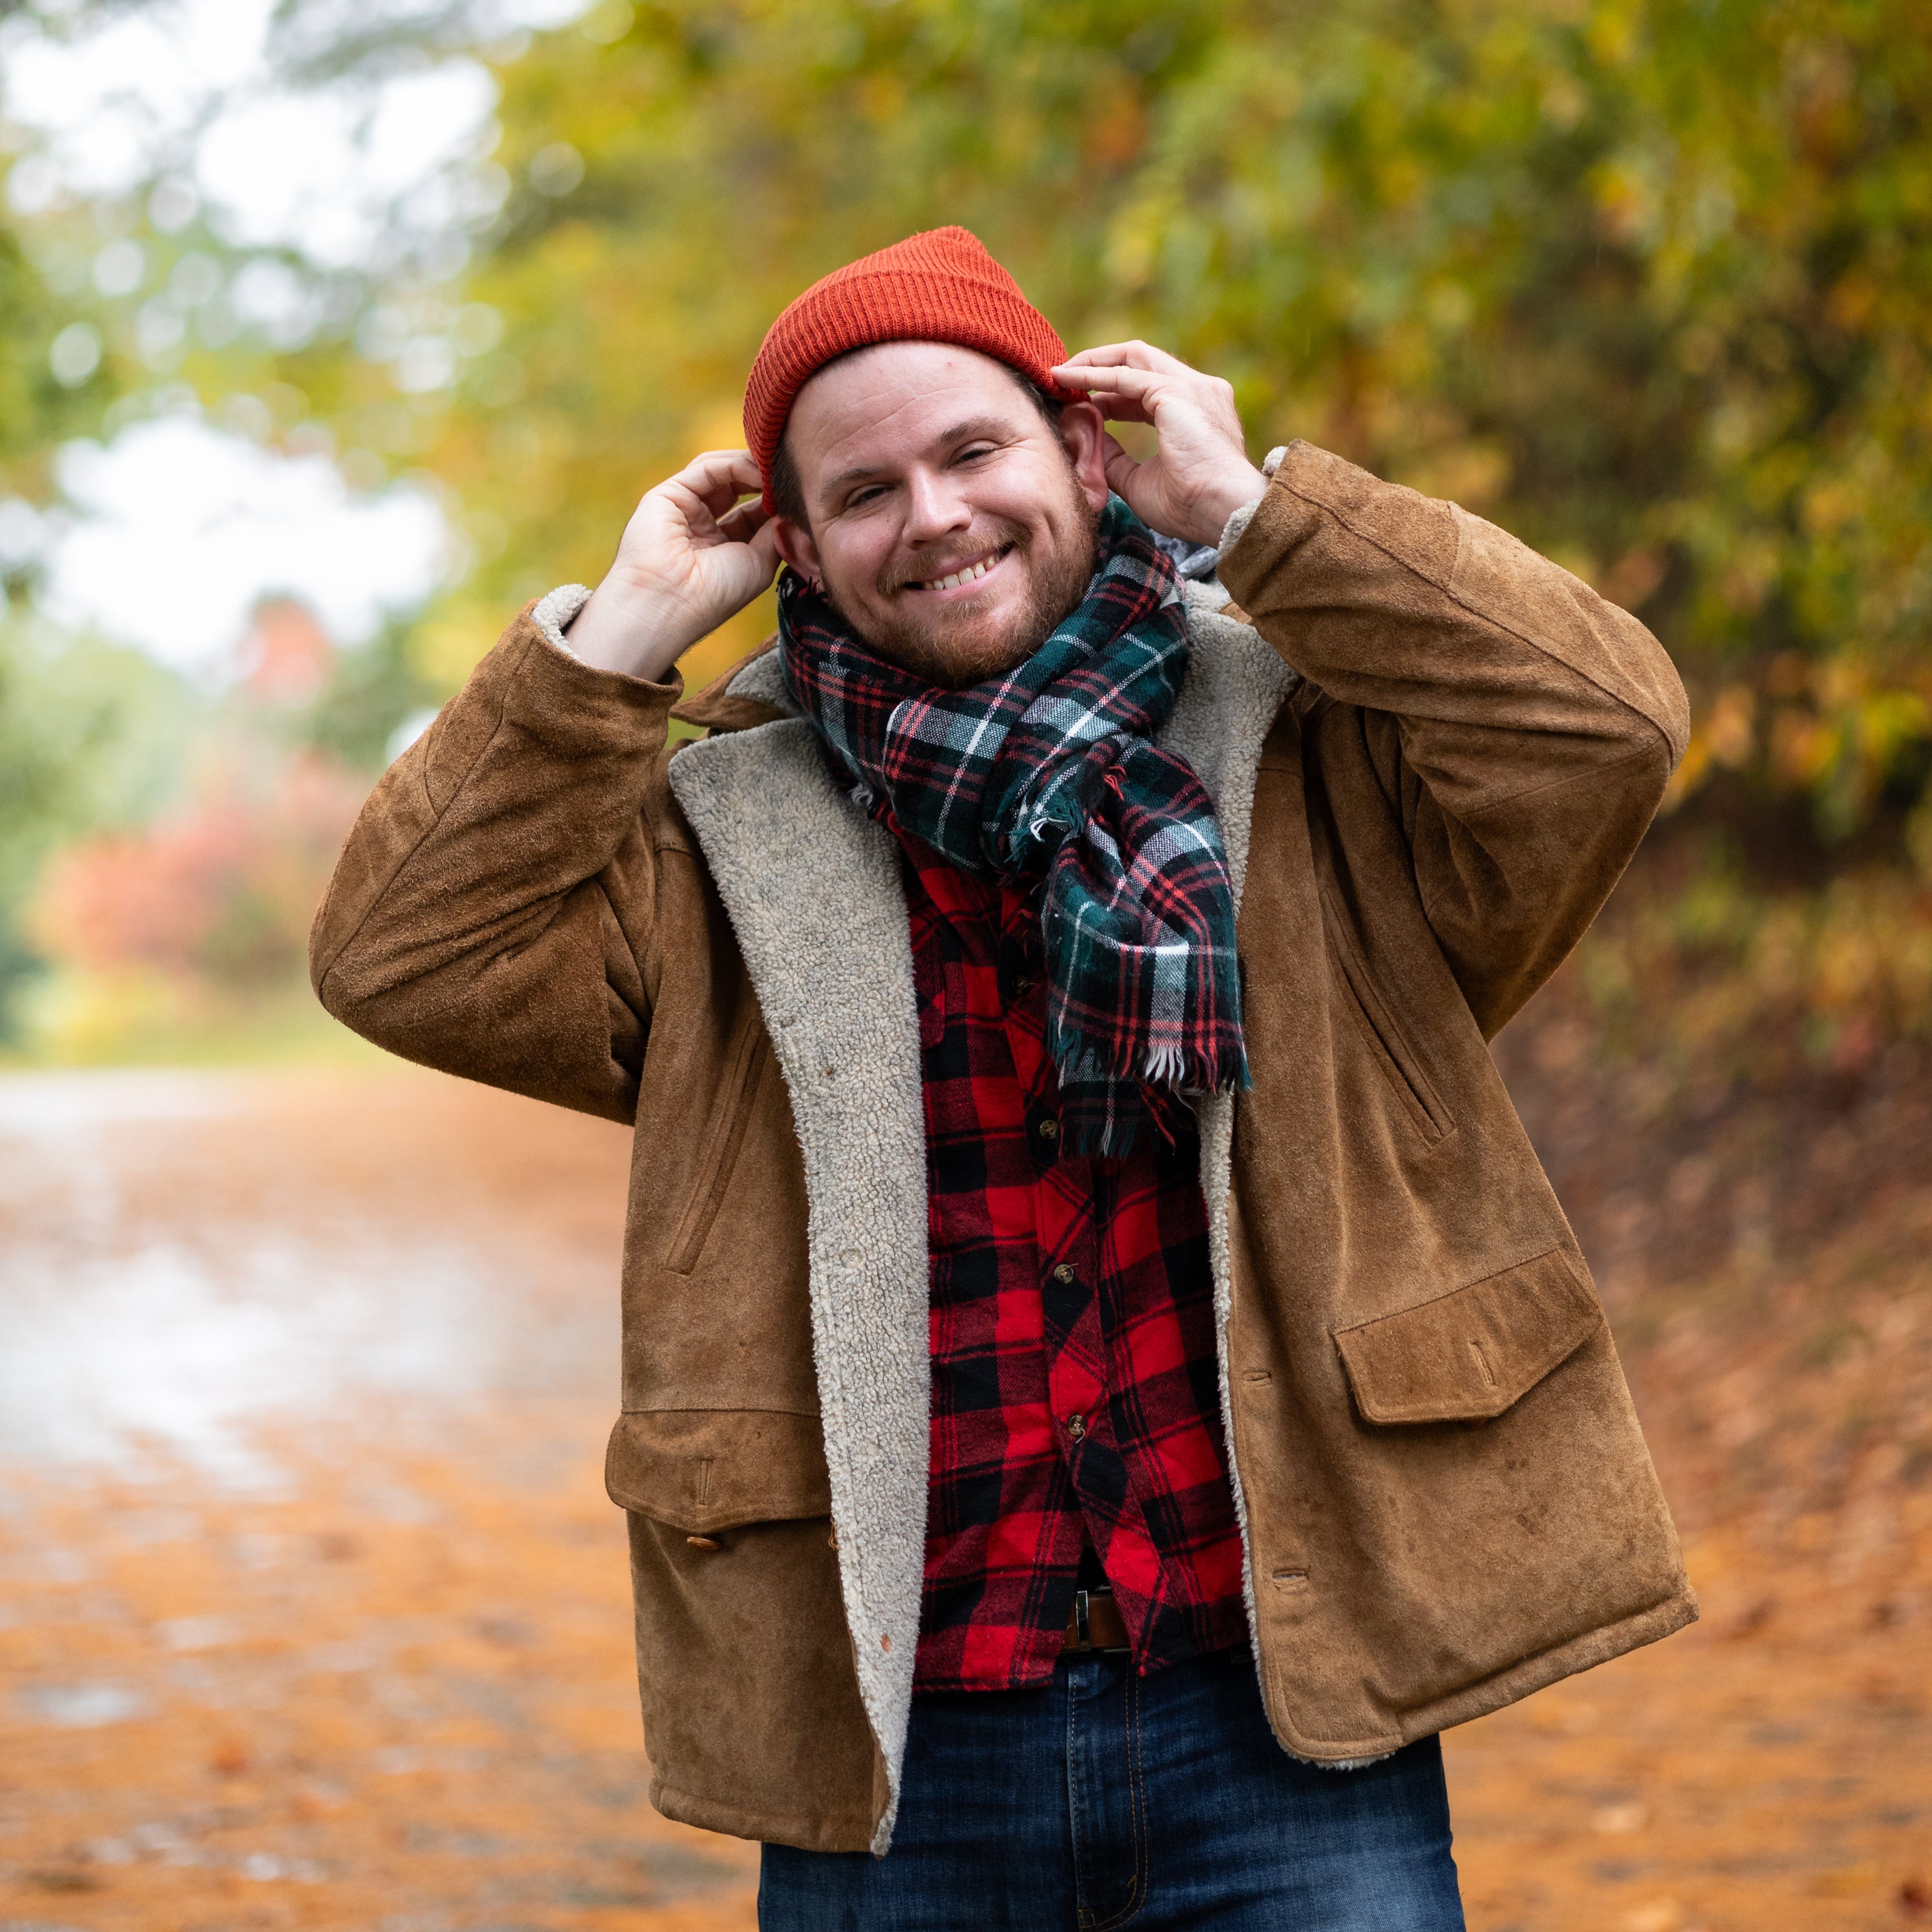 Luke pulls a hat over his head while smiling at the camera. He wears a tartan scarf and brown jacket over a checkered red-and-black shirt.